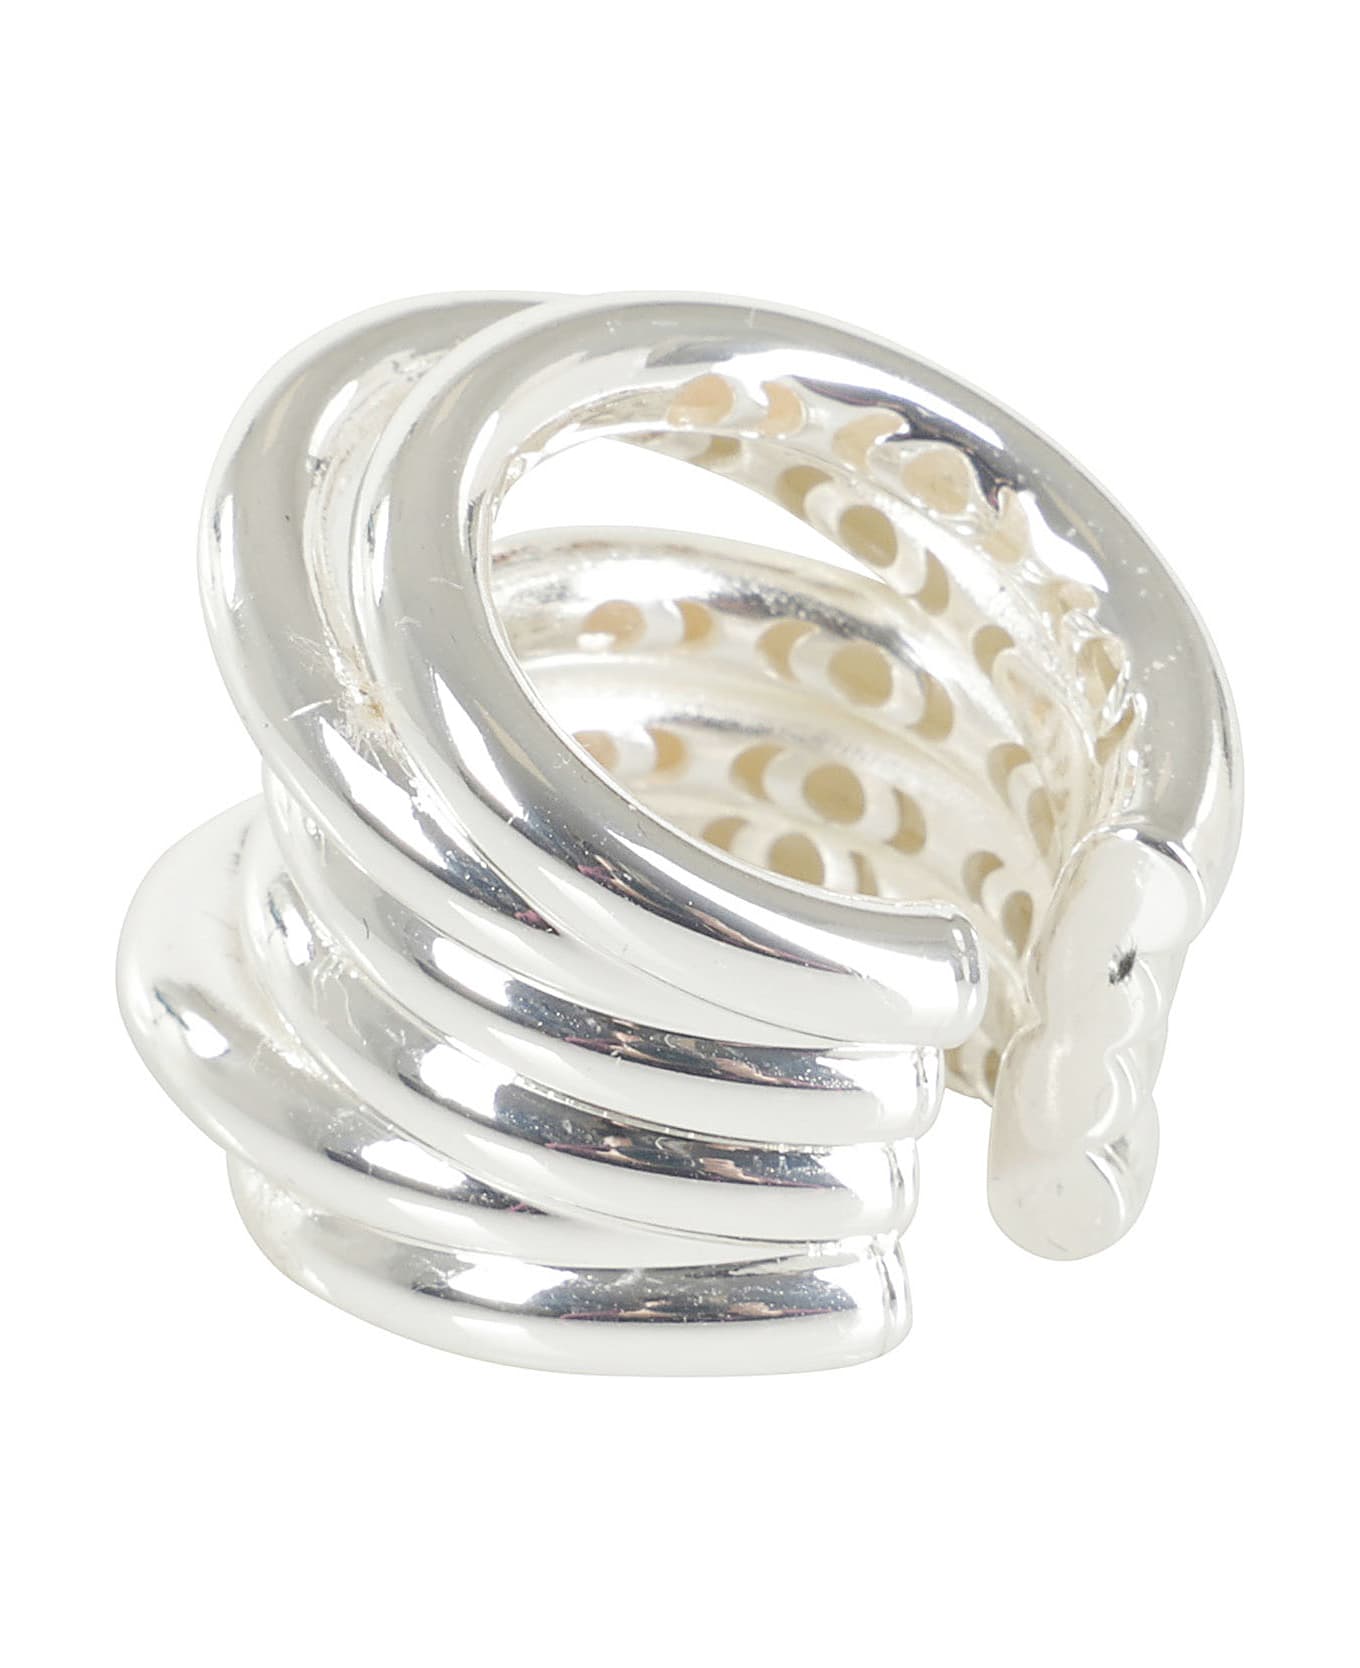 Federica Tosi Ring Ale New - Silver